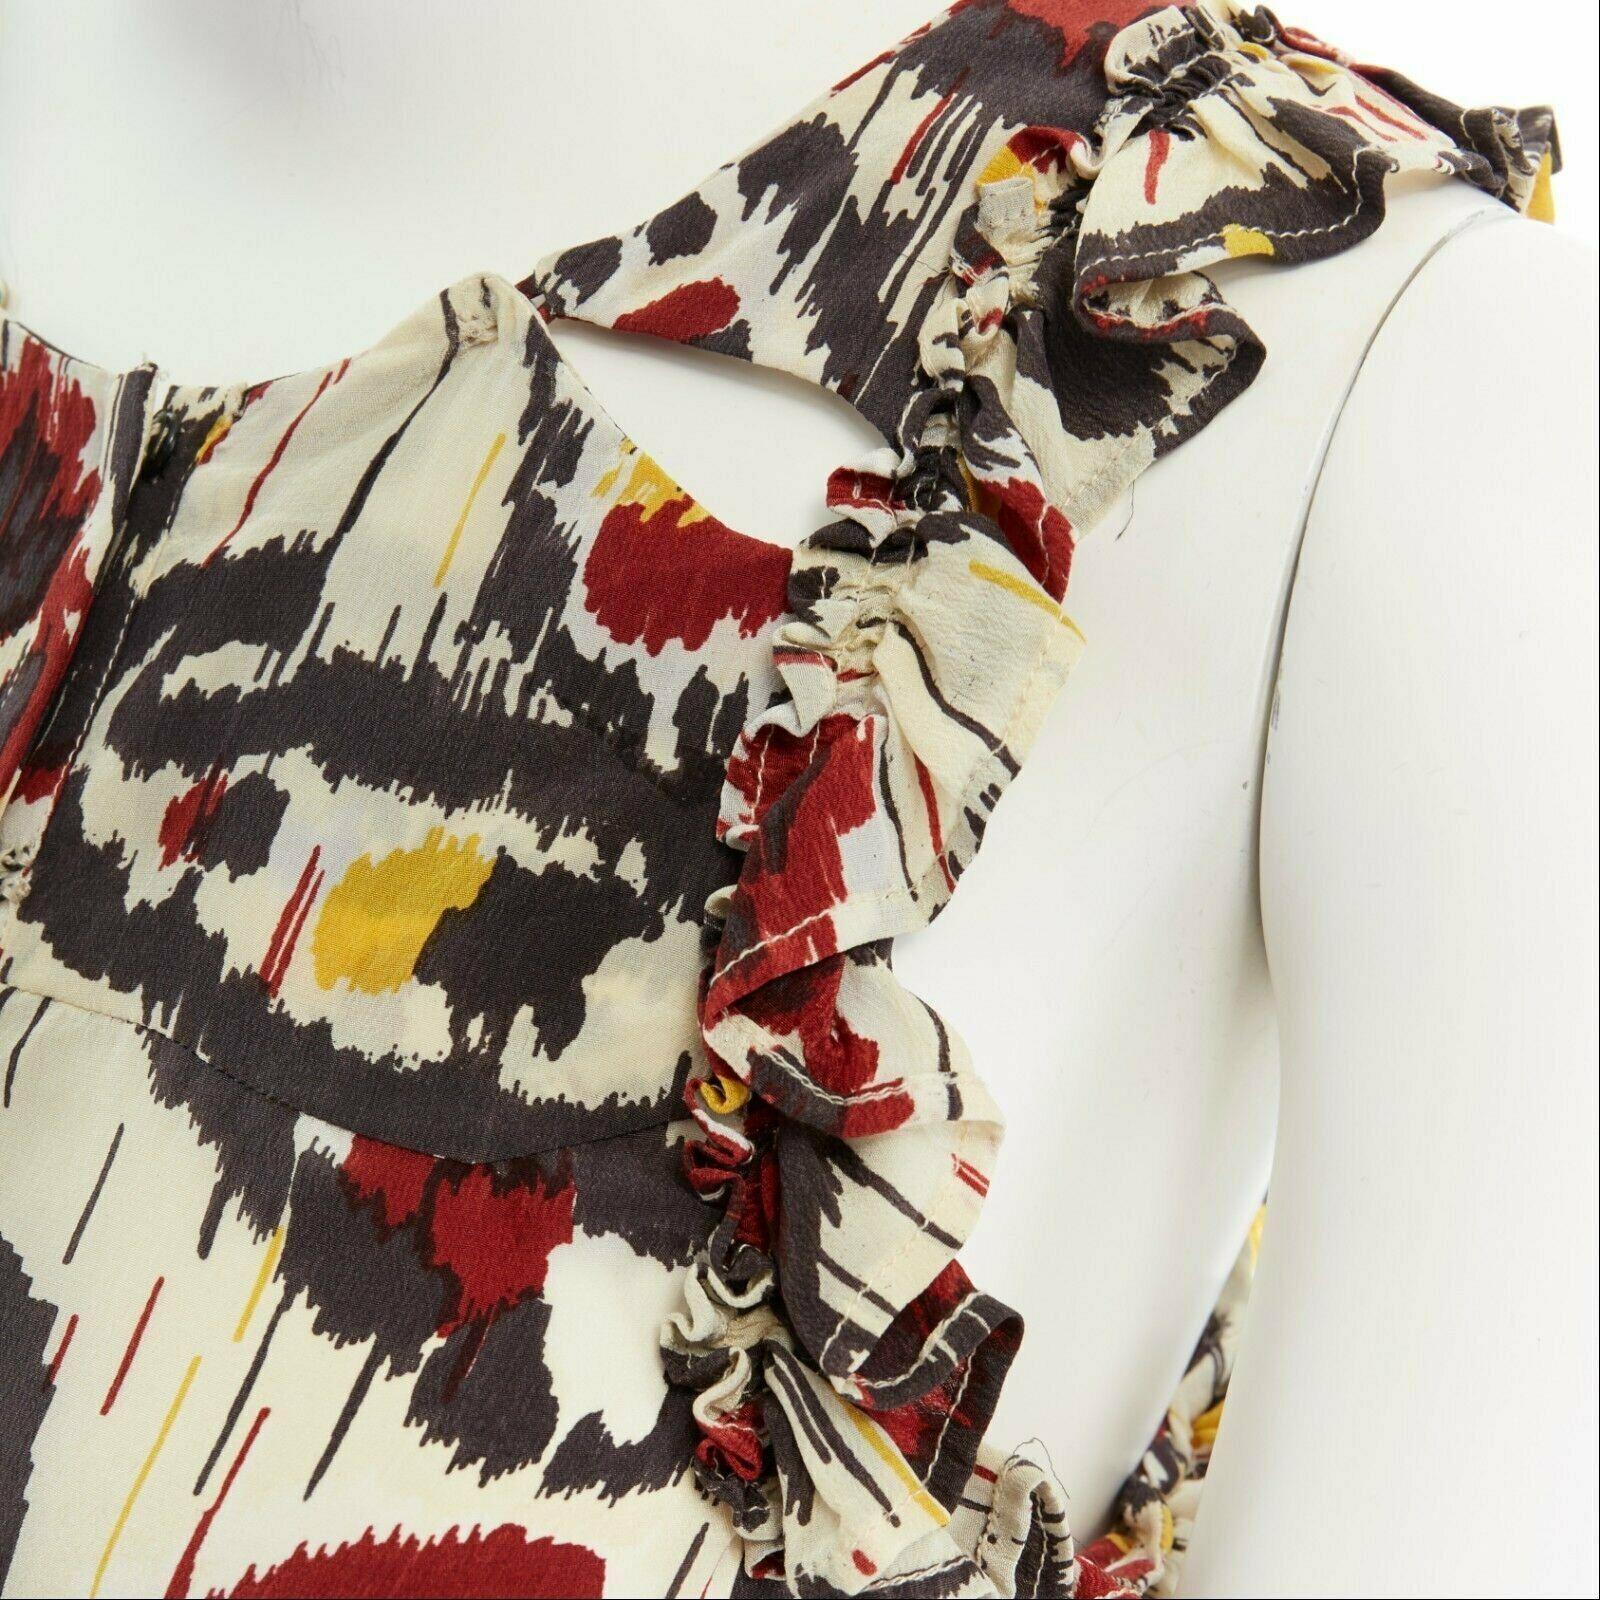 ISABEL MARANT Ikat cream ethnic print silk ruffle cut-out top FR34 XS US2 UK6 For Sale 3